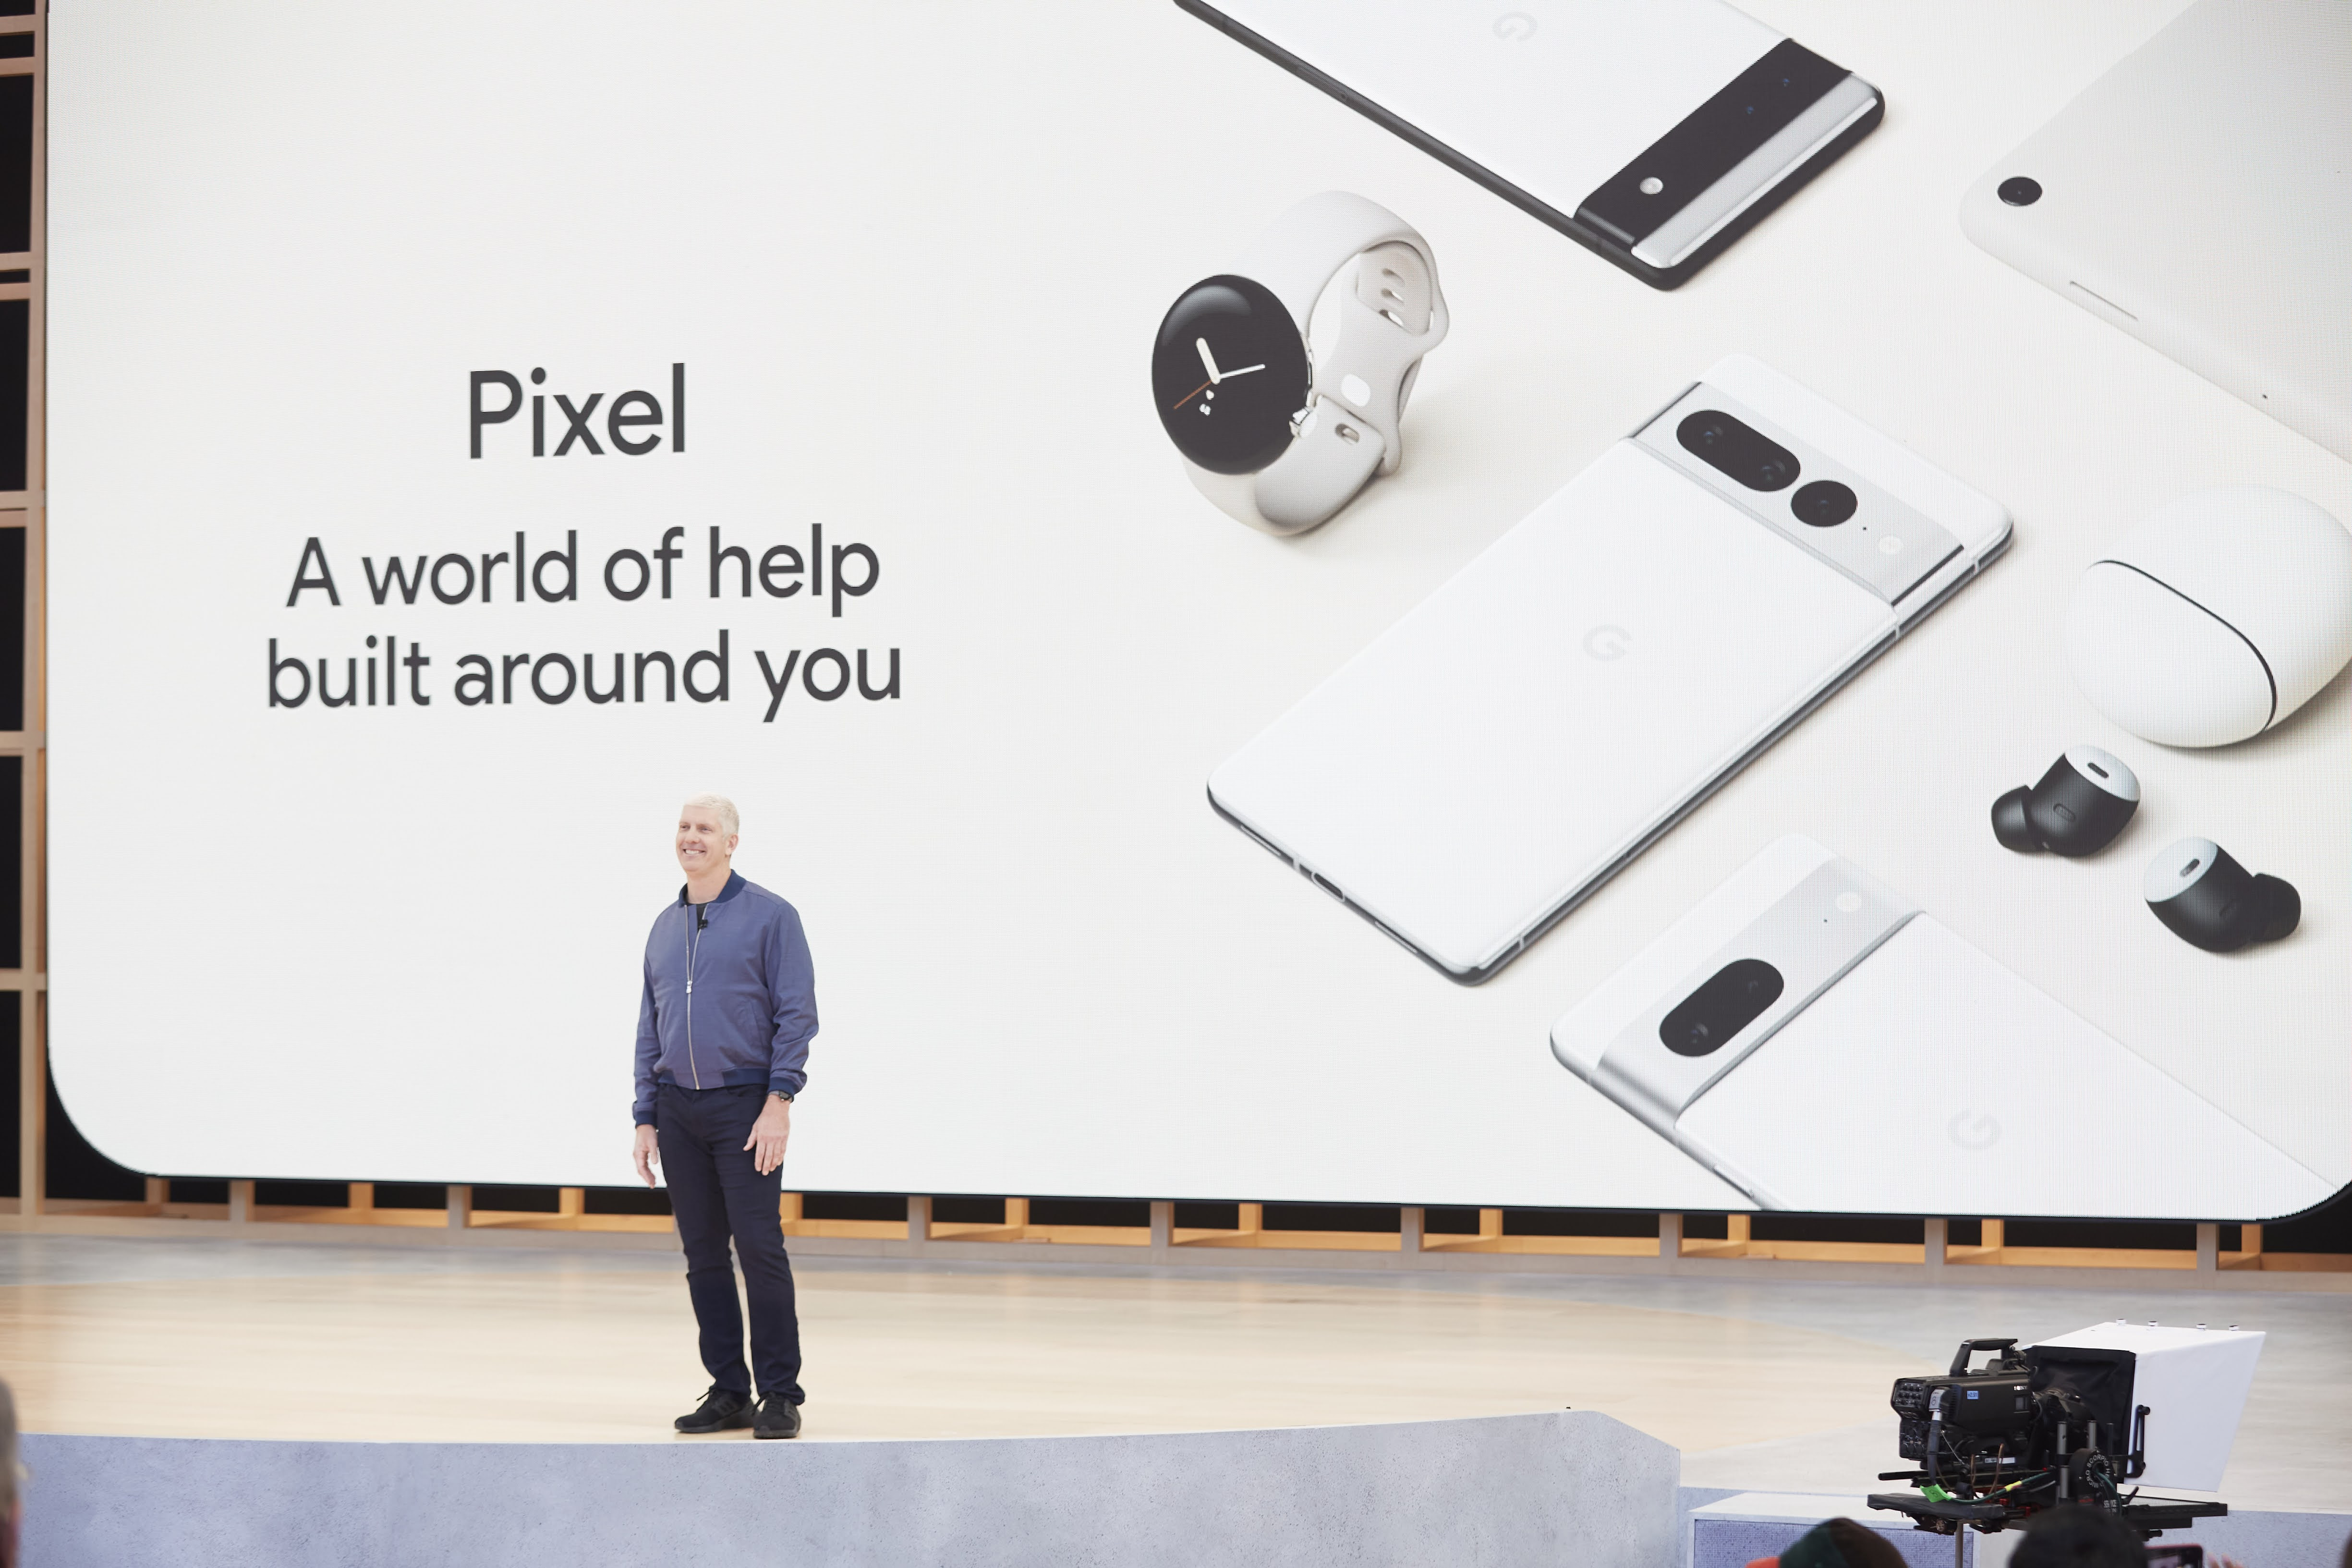 Poll: What was your favorite Pixel announcement at Google I/O 2022?